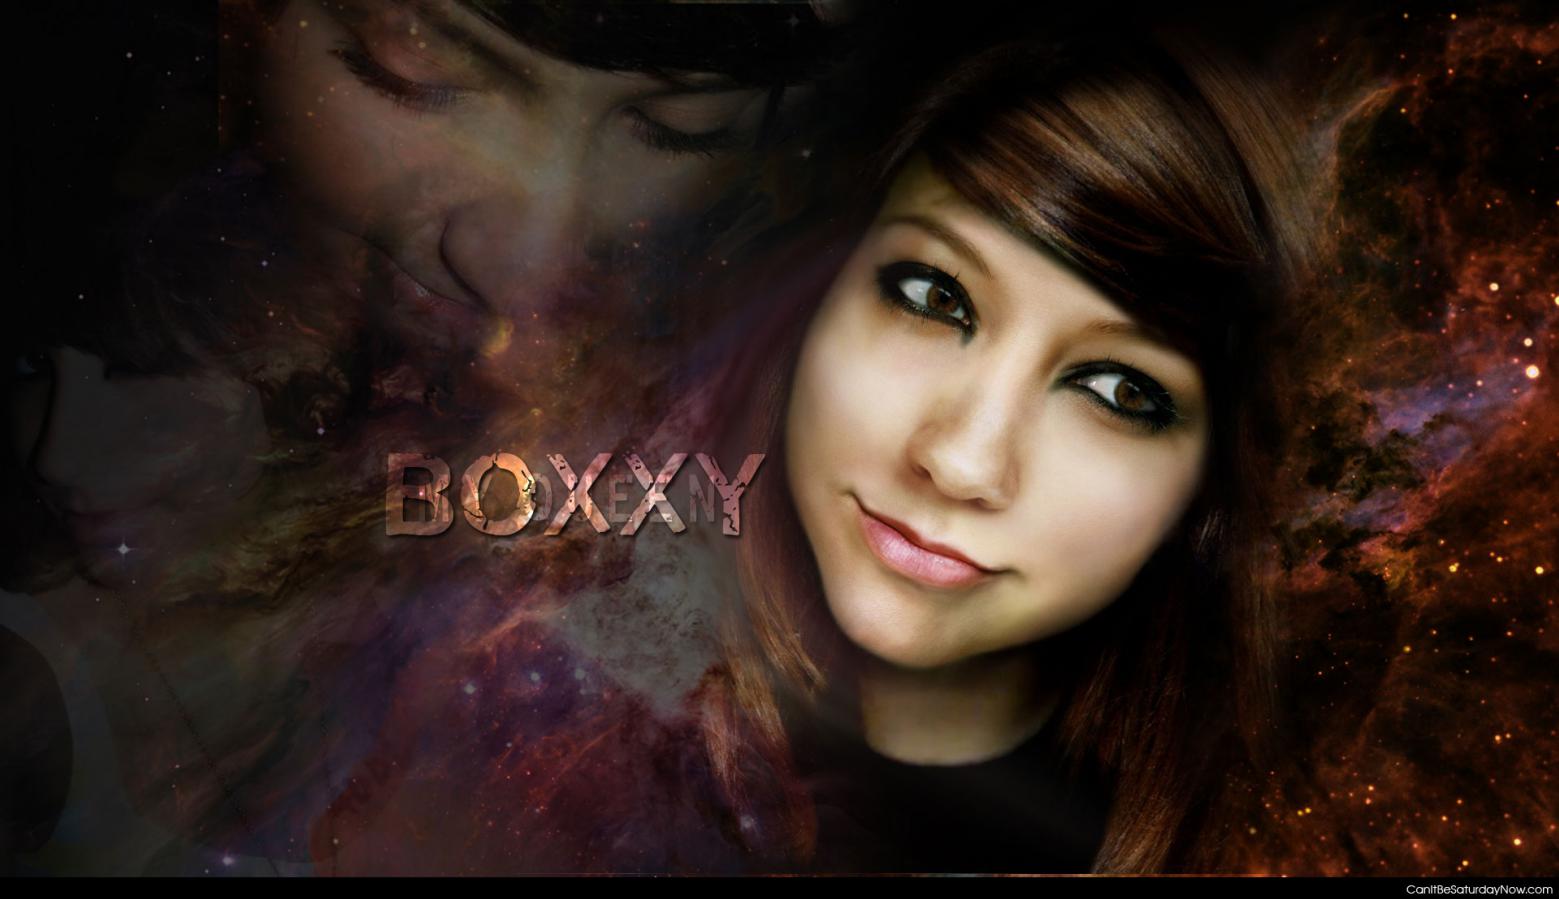 Boxxy space - Background for a boxxy fan